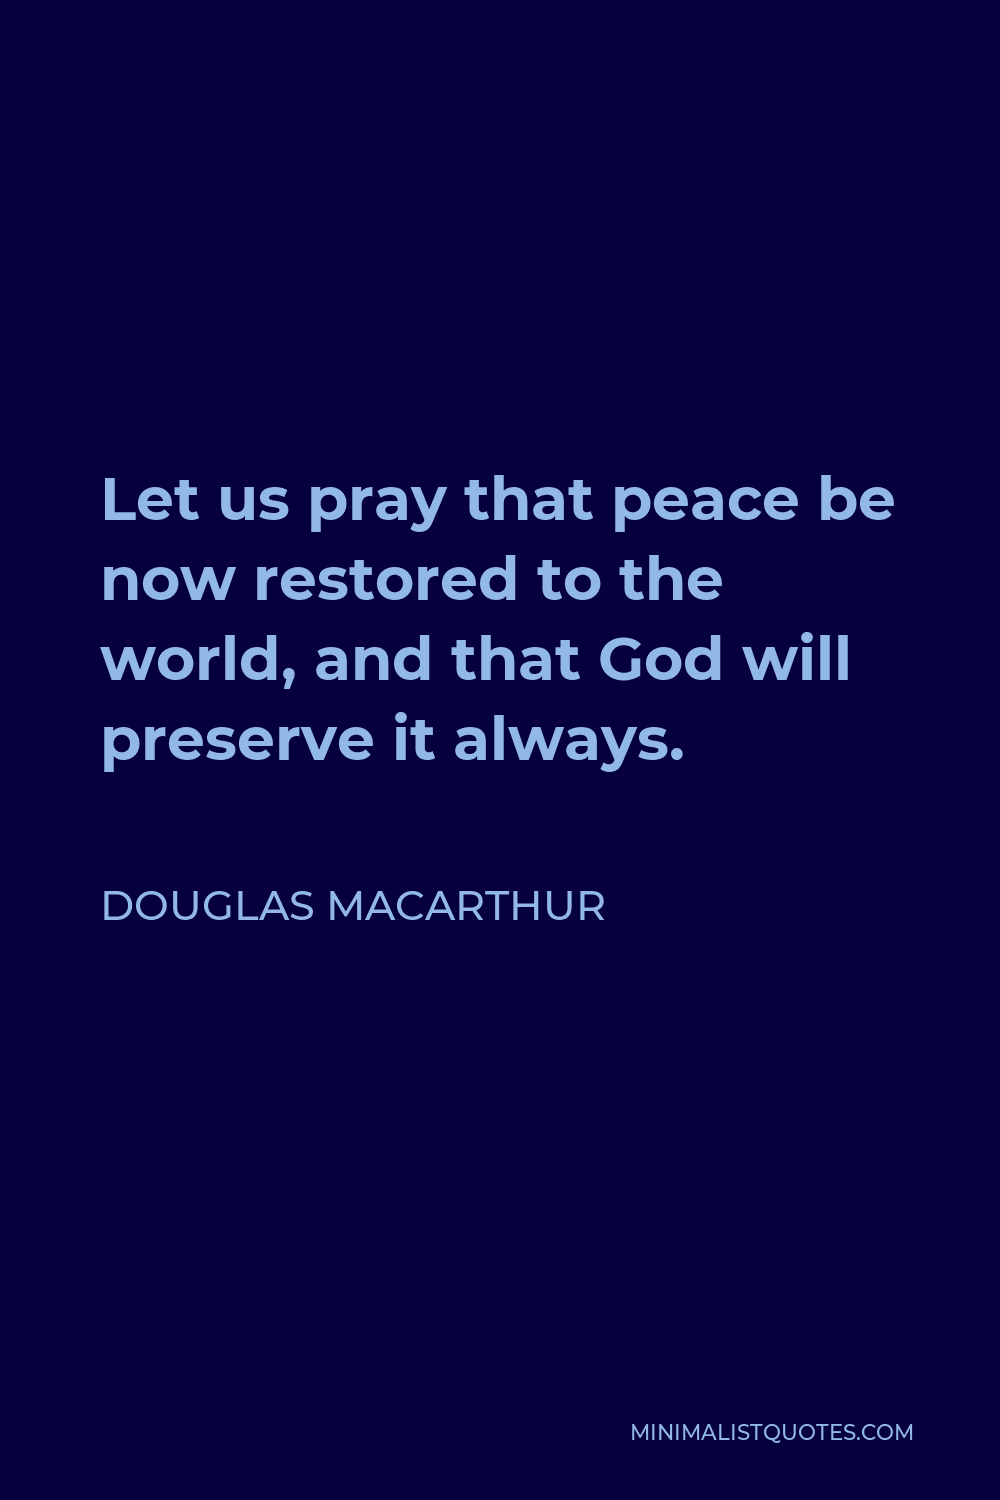 Douglas MacArthur Quote - Let us pray that peace be now restored to the world, and that God will preserve it always.